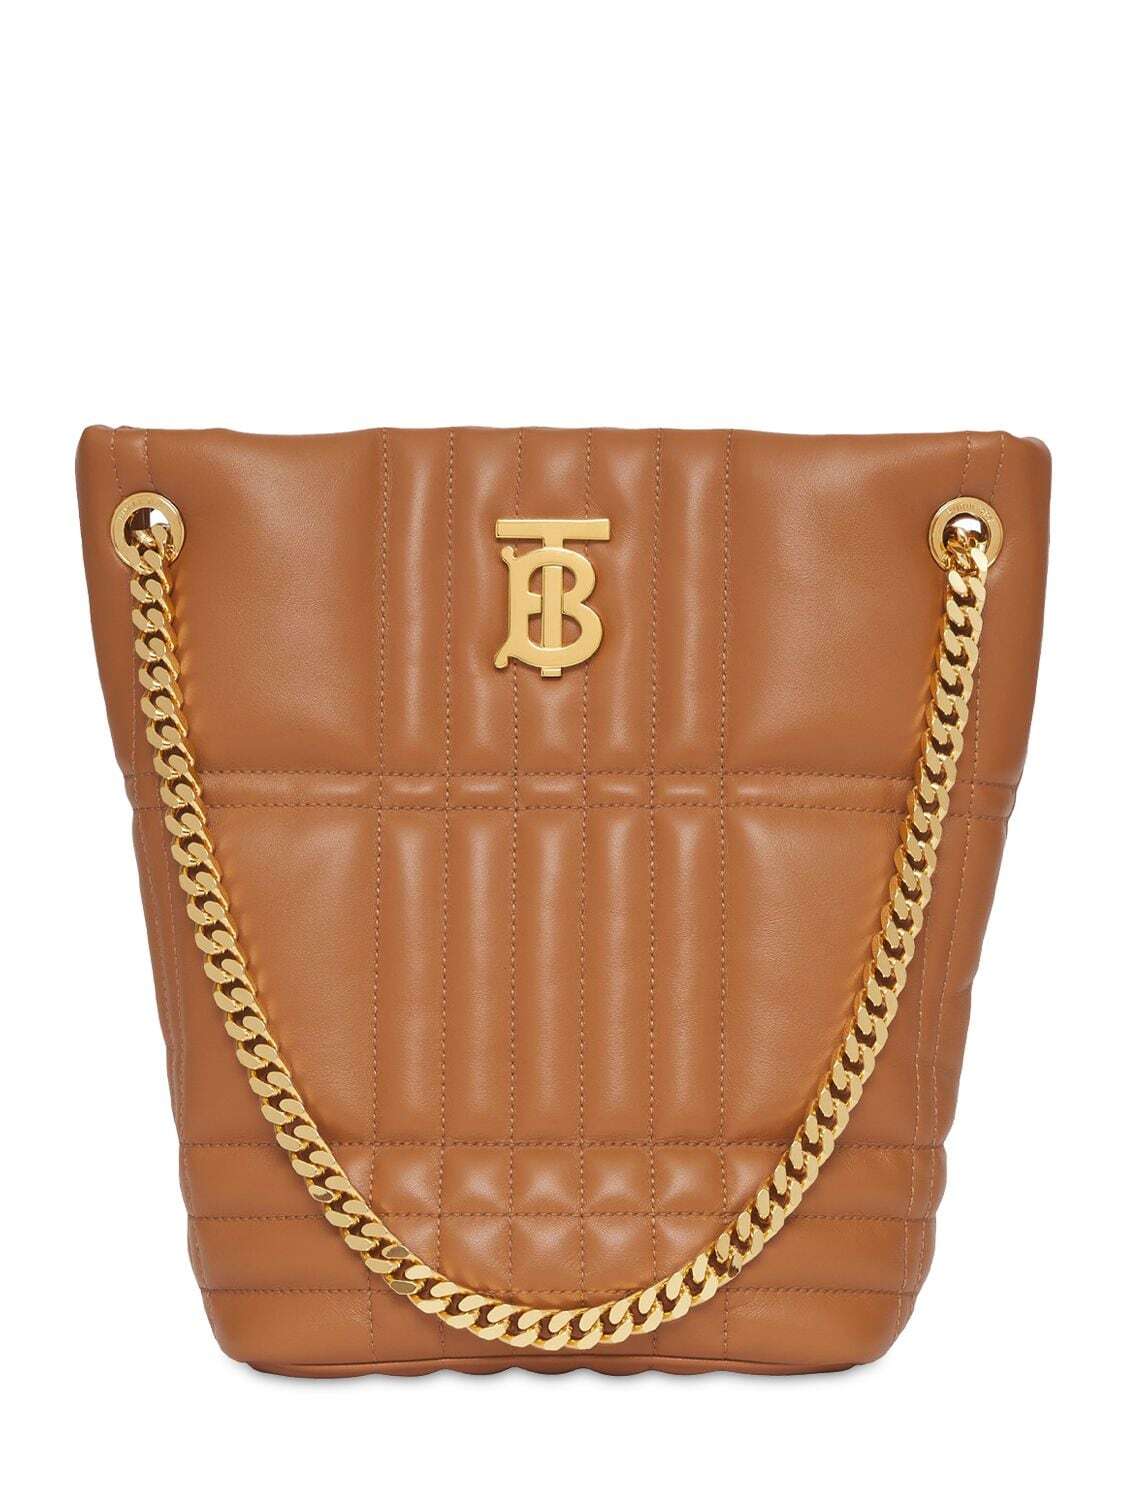 BURBERRY Small Lola Quilted Leather Bucket Bag in brown